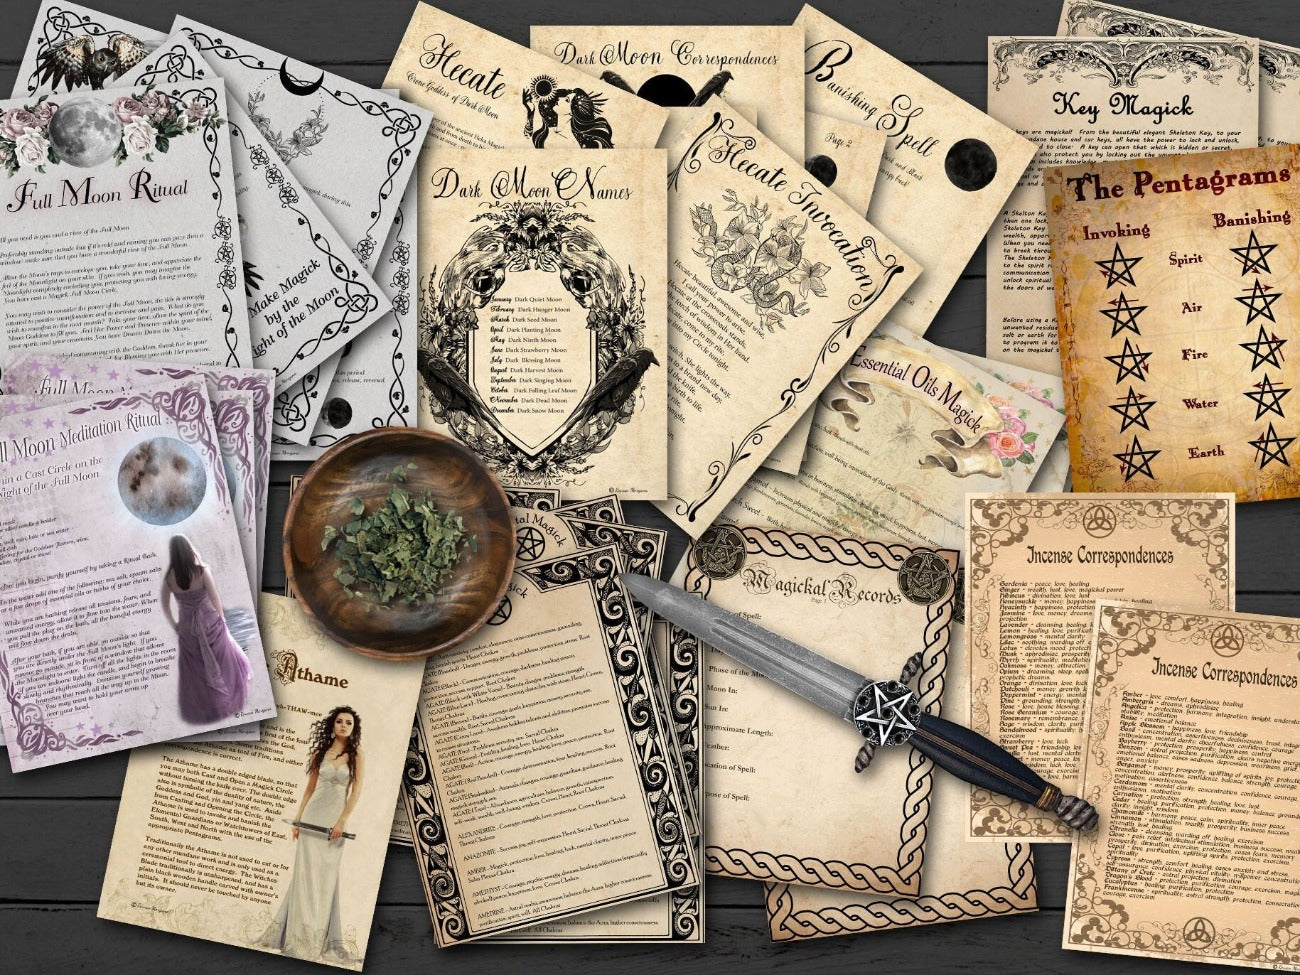 WITCHCRAFT BUNDLE, Witch Starter Kit, Grimoire Book of Shadows, Guide to be a Witch, Baby Witch Bundle, Wicca Book, 293 Printable Pages - Morgana Magick Spell